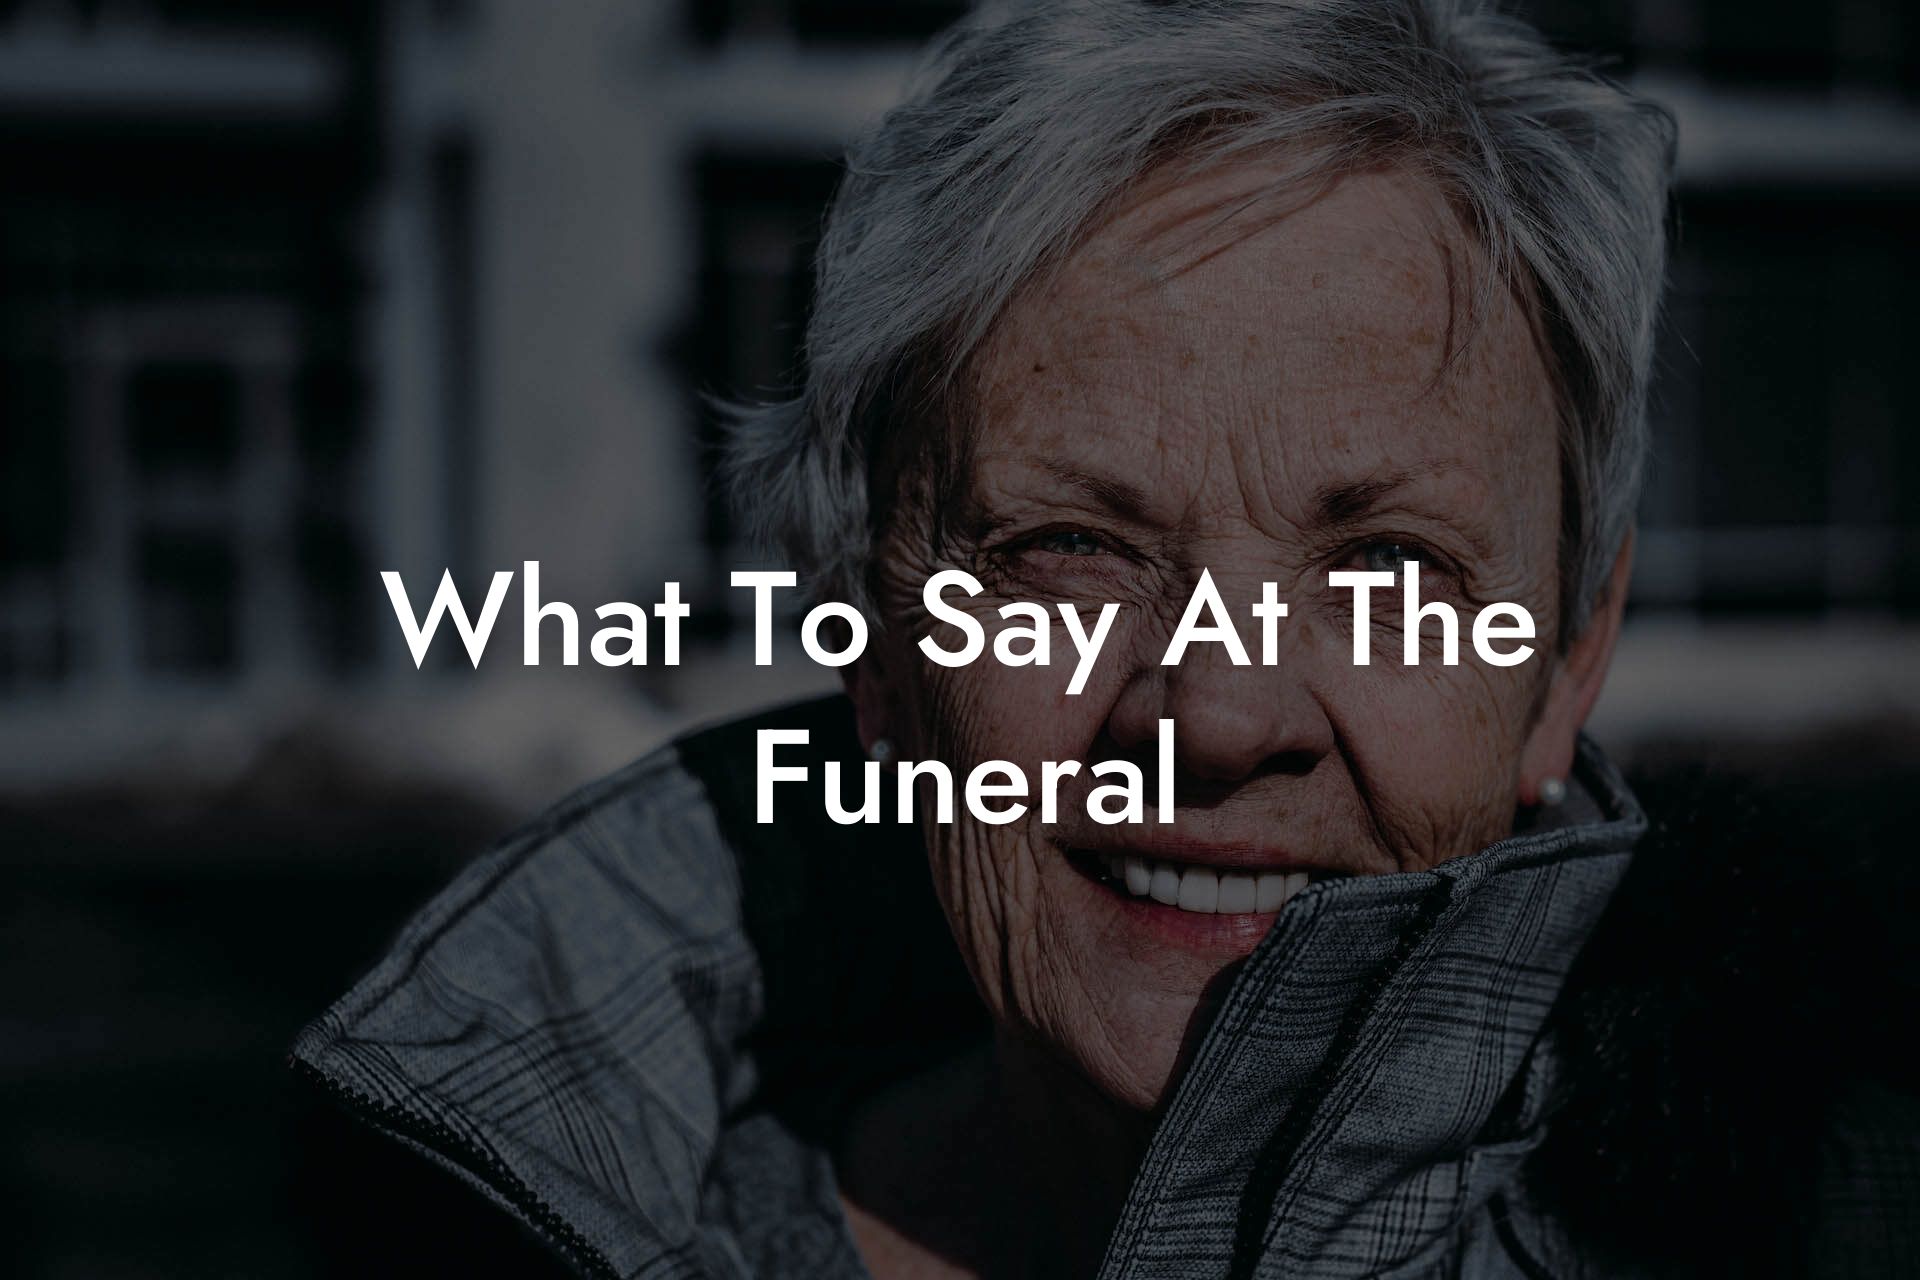 What To Say At The Funeral